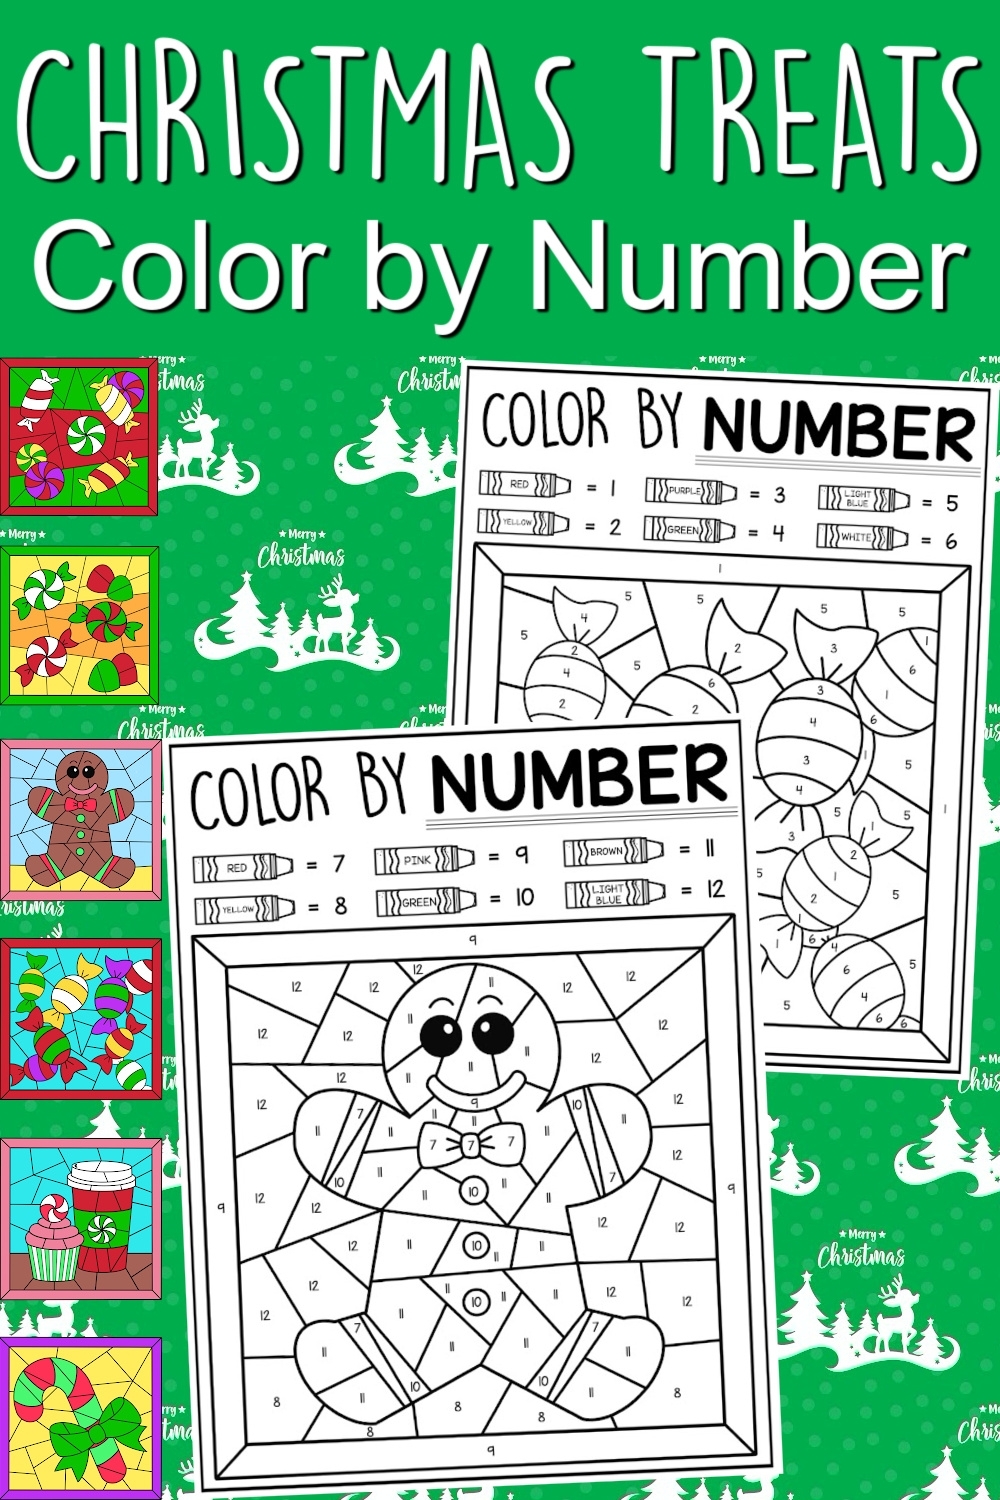 FREE Christmas Color By Number Coloring Pages - Free Printable Christmas Color By Number Coloring Pages